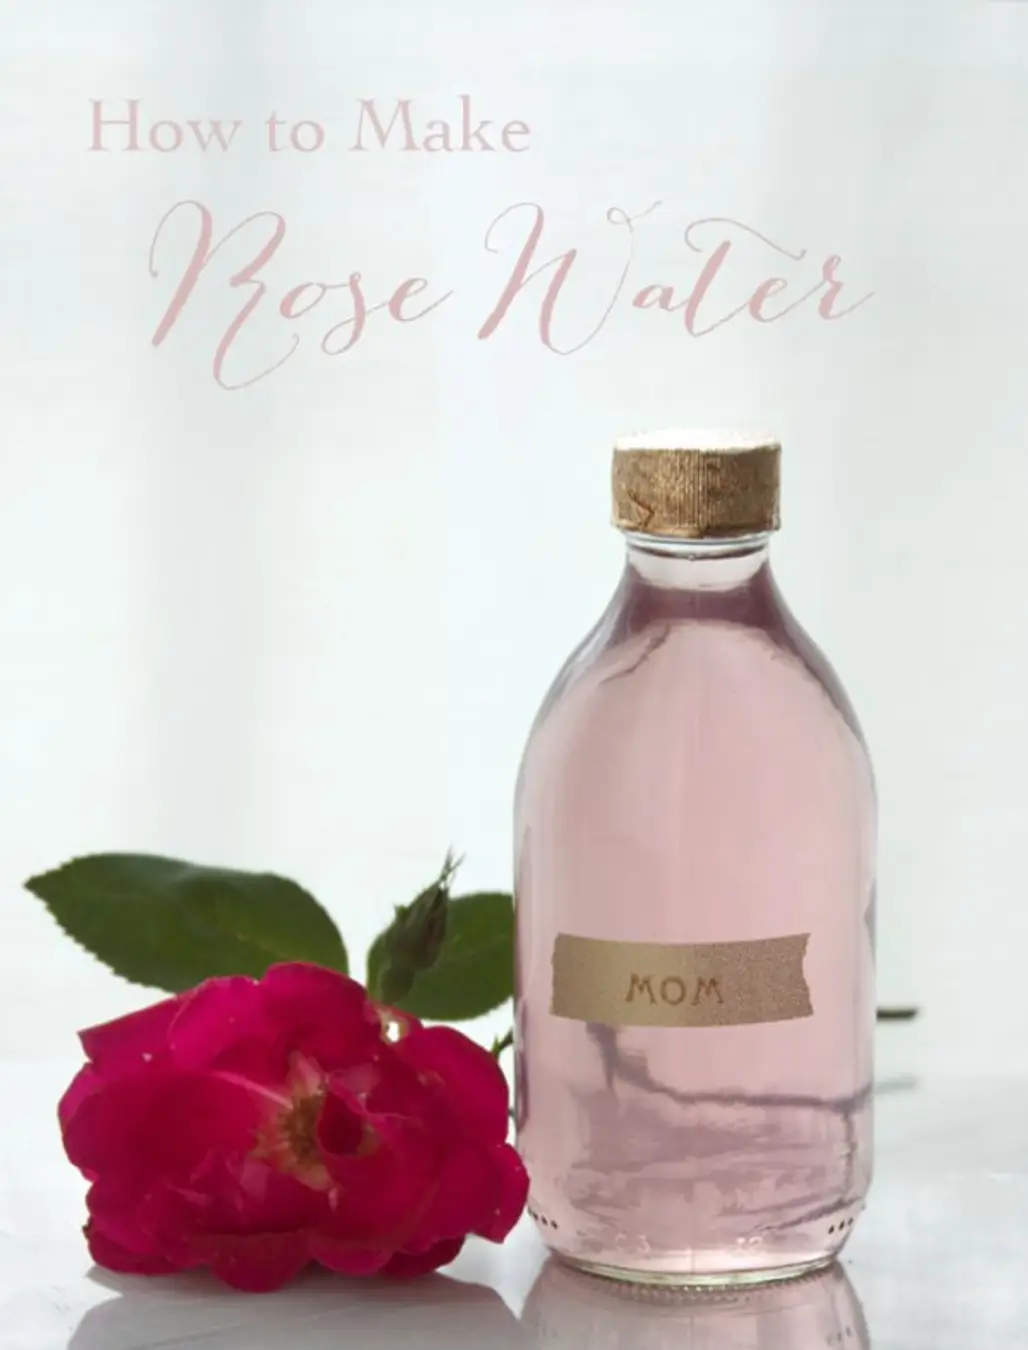 How to Make Wild Rose Water for a Natural Skin Freshener/toner